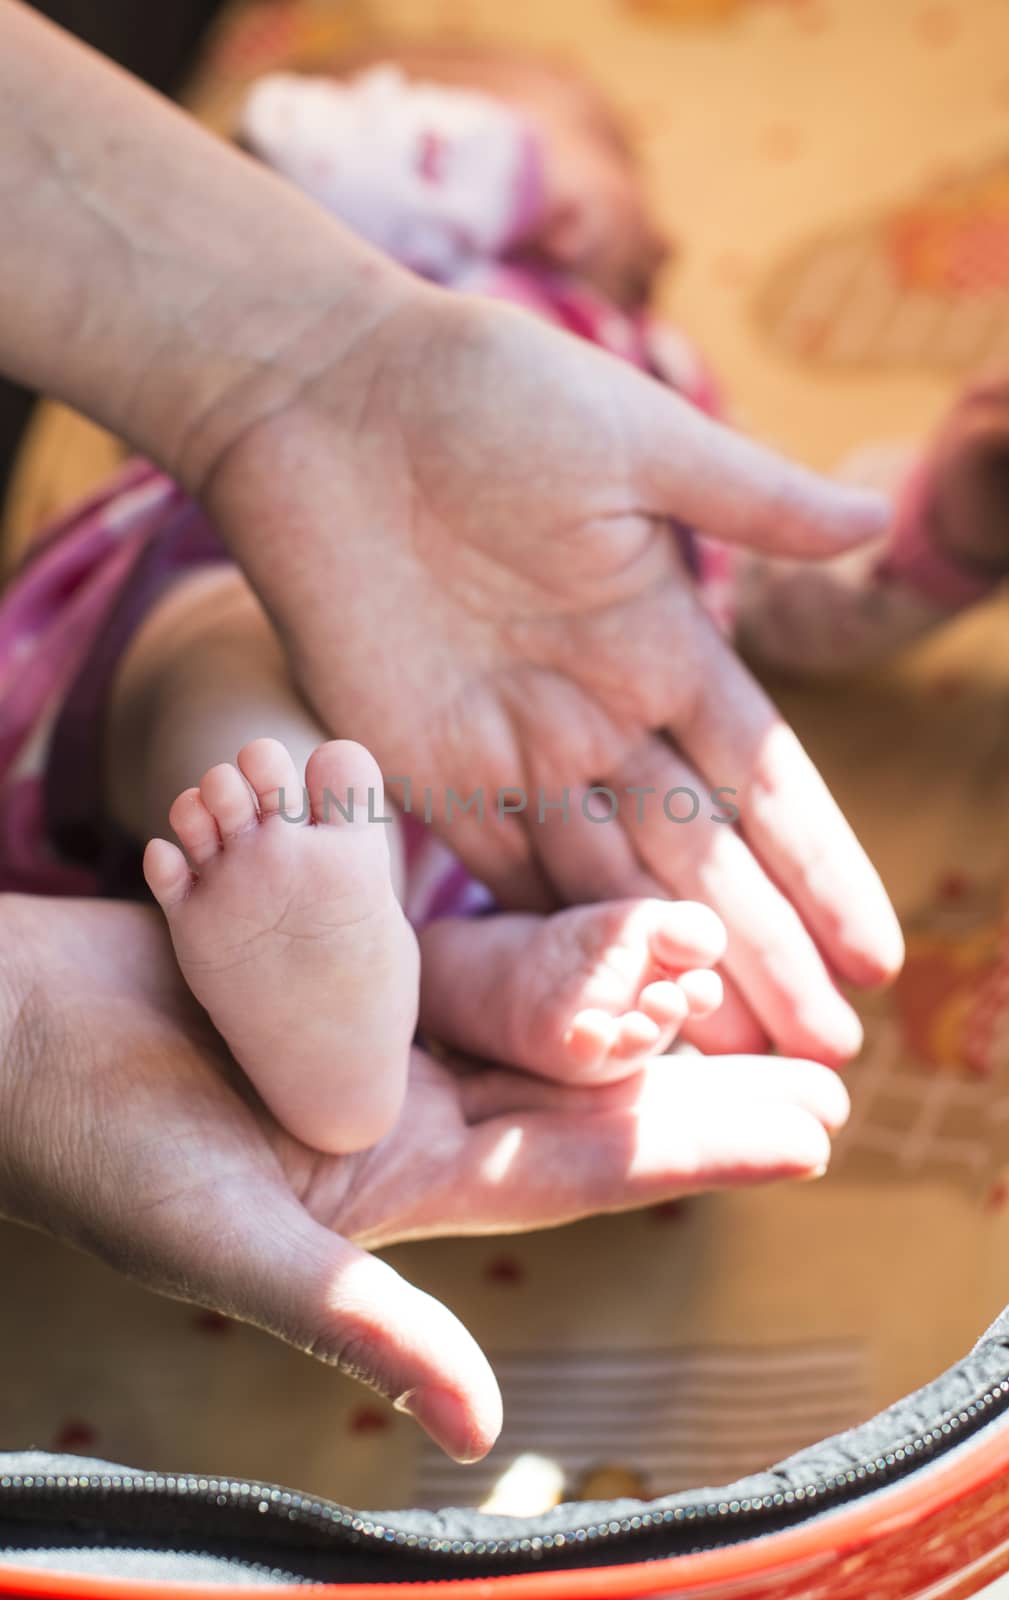 Baby feet and mother's hands